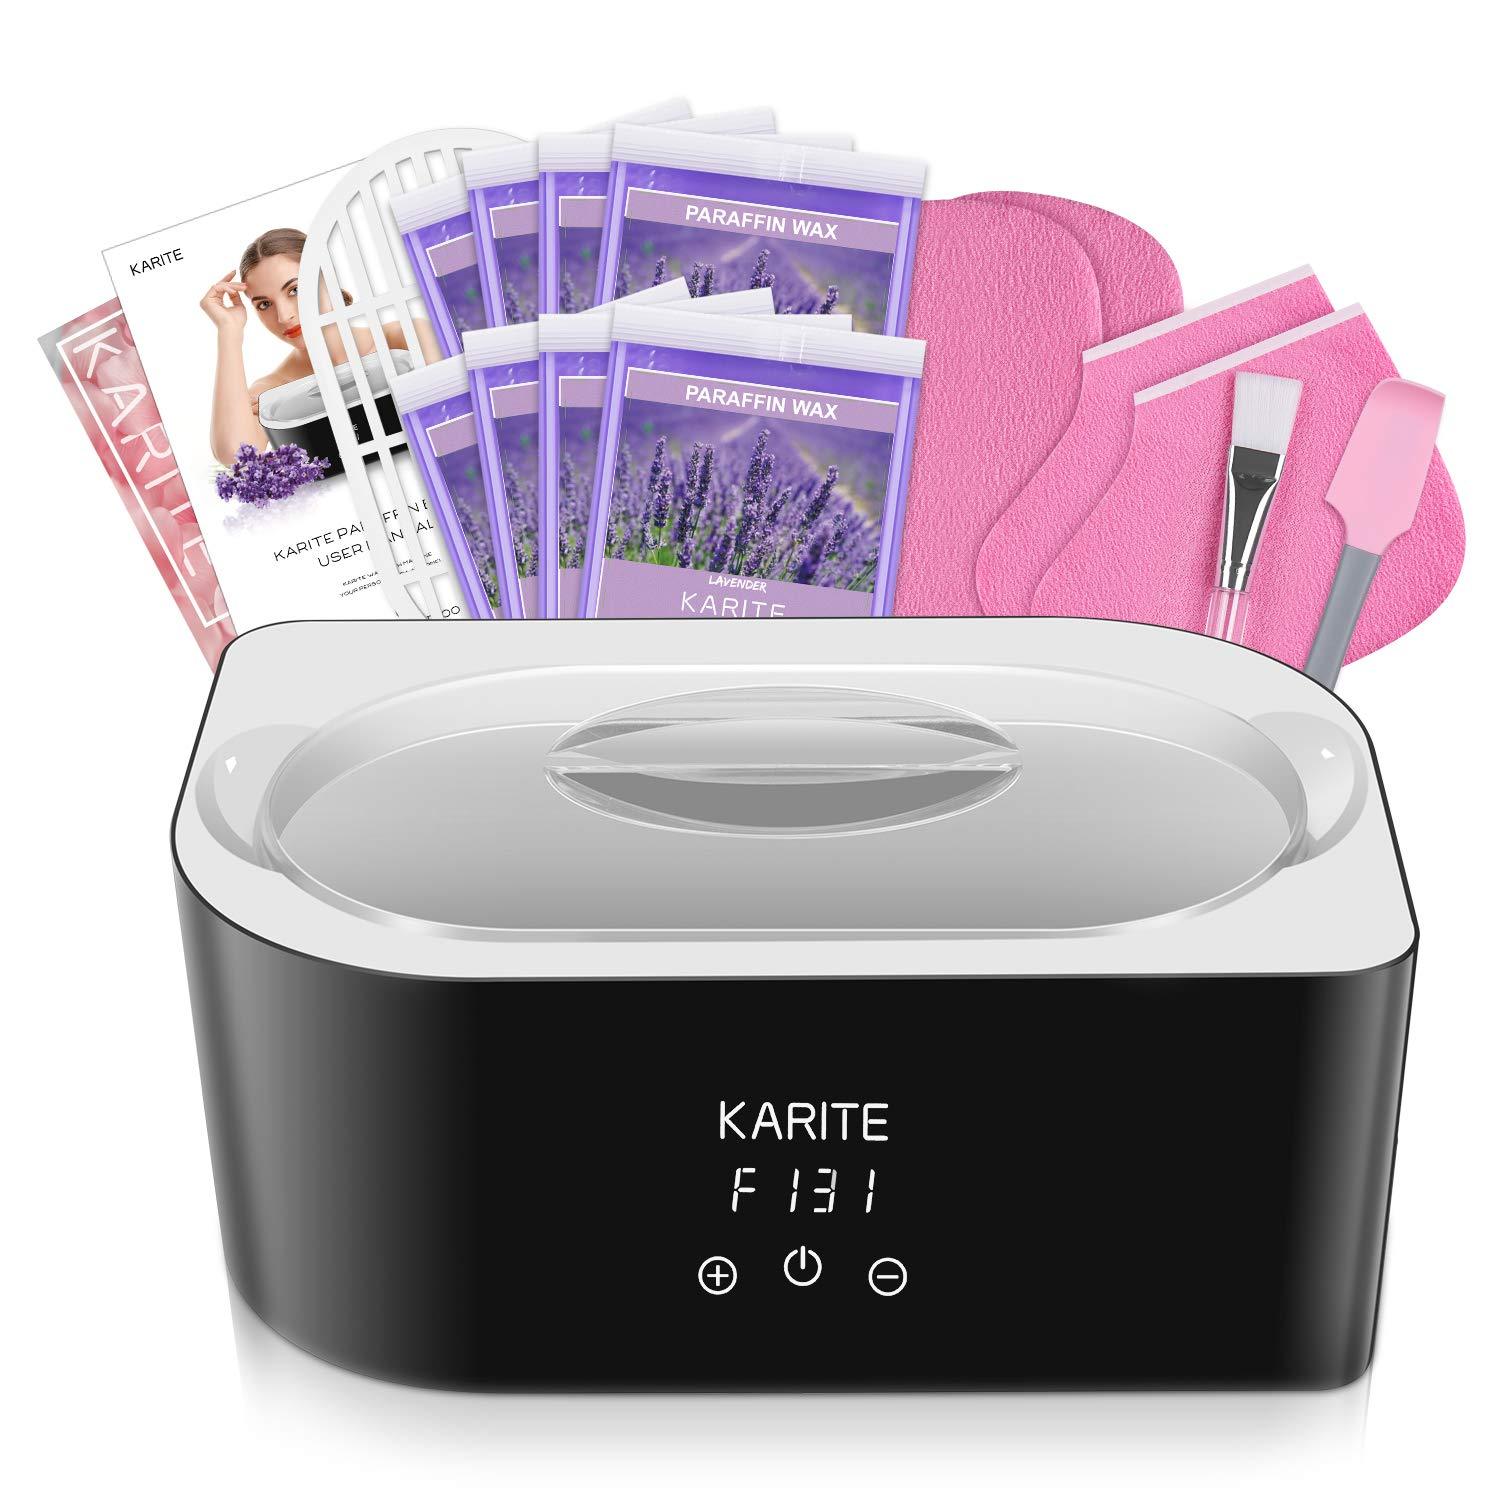 Paraffin Wax Machine for Hand and Feet - Karite Paraffin Wax Bath 4000ml Paraffin Wax Warmer Moisturizing Kit Auto-time and Keep Warm Paraffin Hand Wax Machine - image 1 of 8